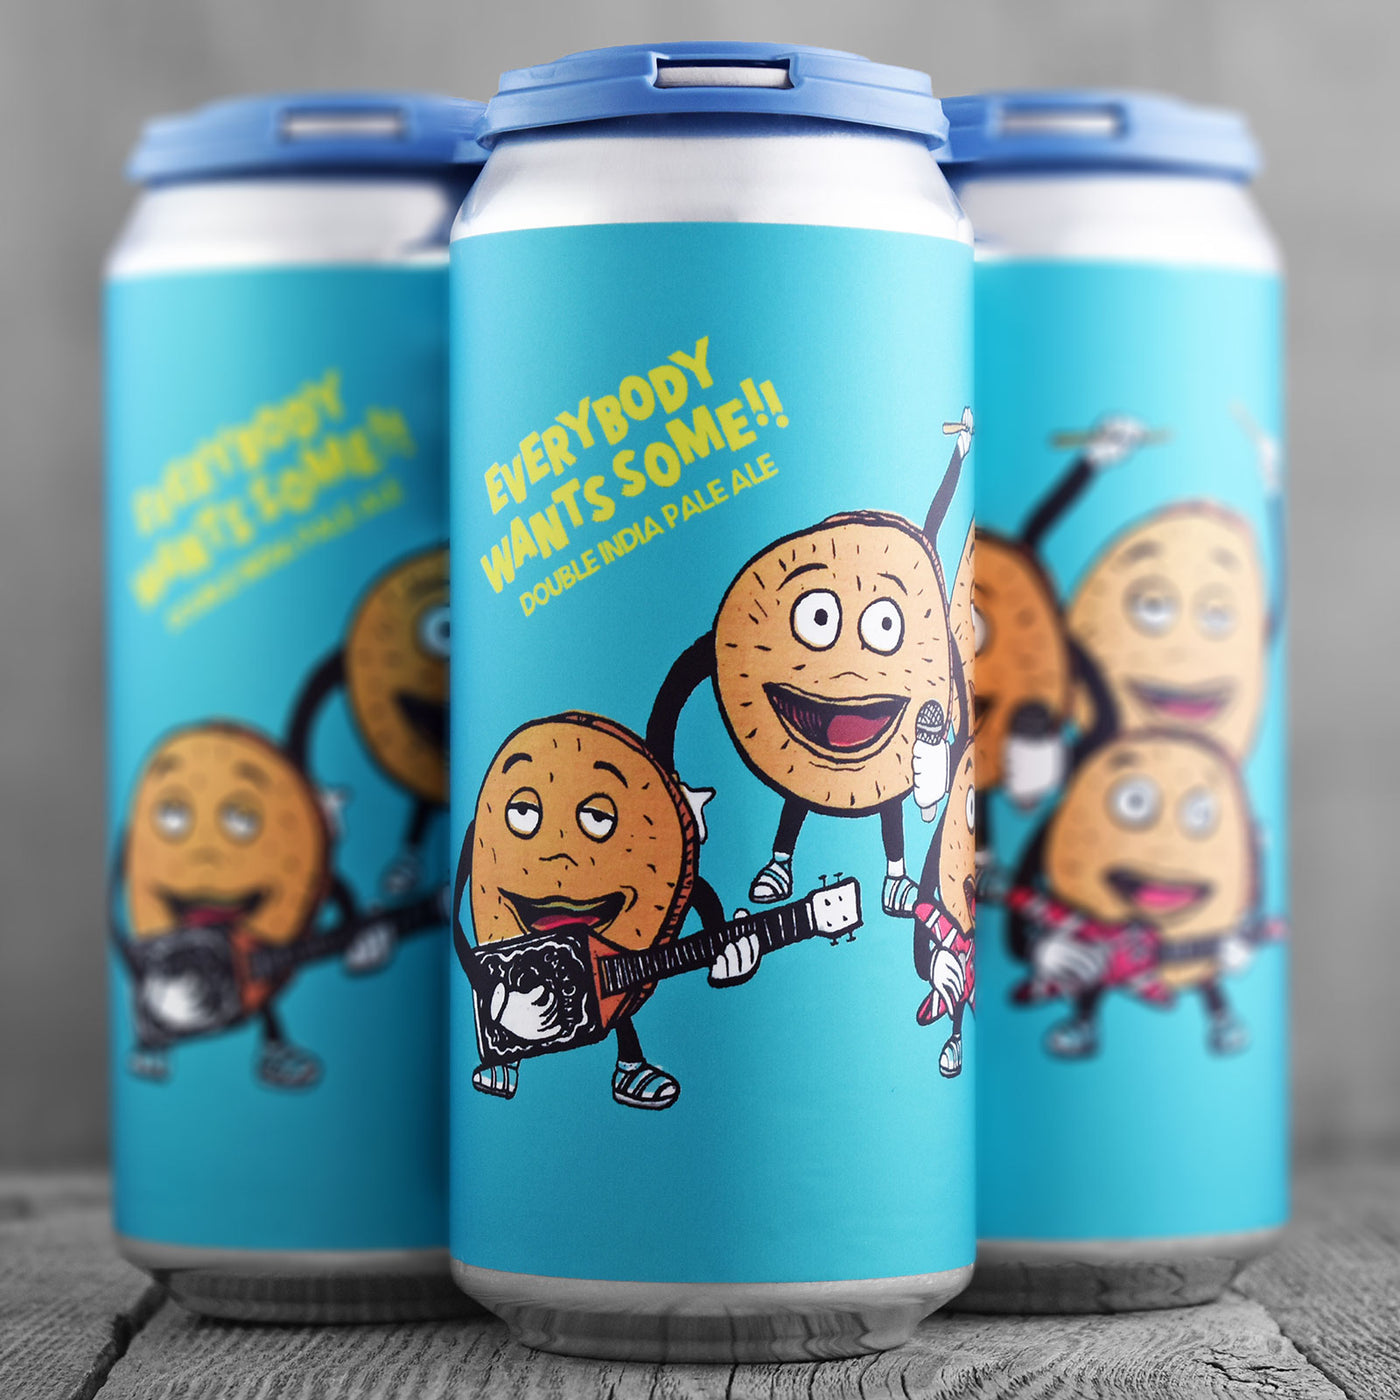 Hoof Hearted Everybody Wants Some!!